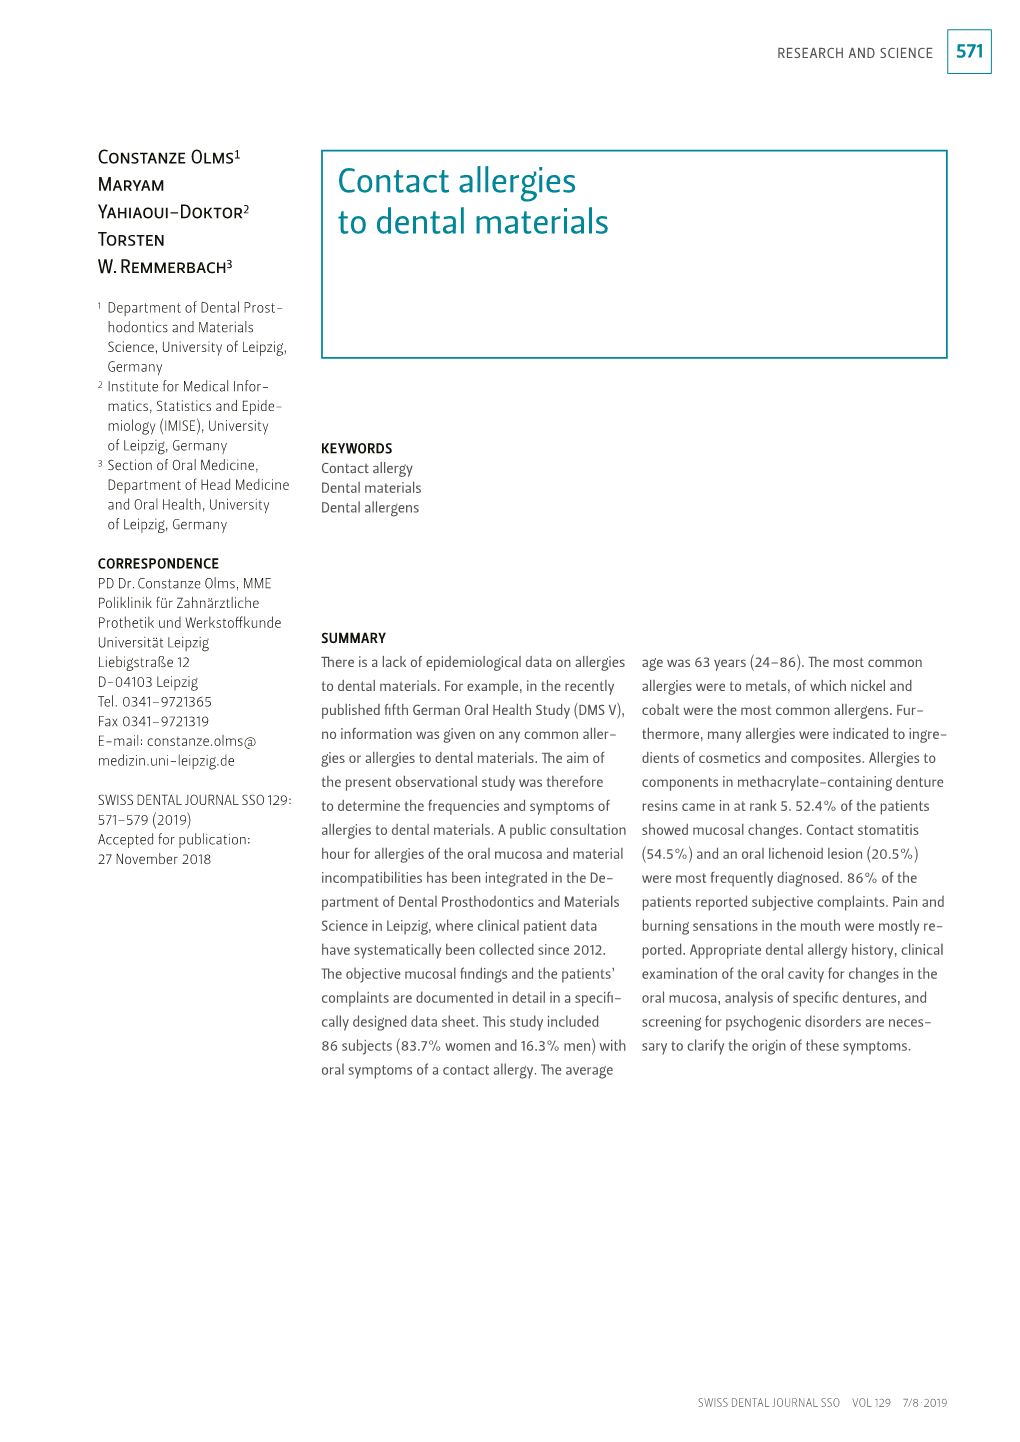 Contact Allergies to Dental Materials Was Not Listed in the in the Literature, Contact Allergy to Metals Is Also Seen As an Ad- DMS V (Jordan & Micheelis 2016)